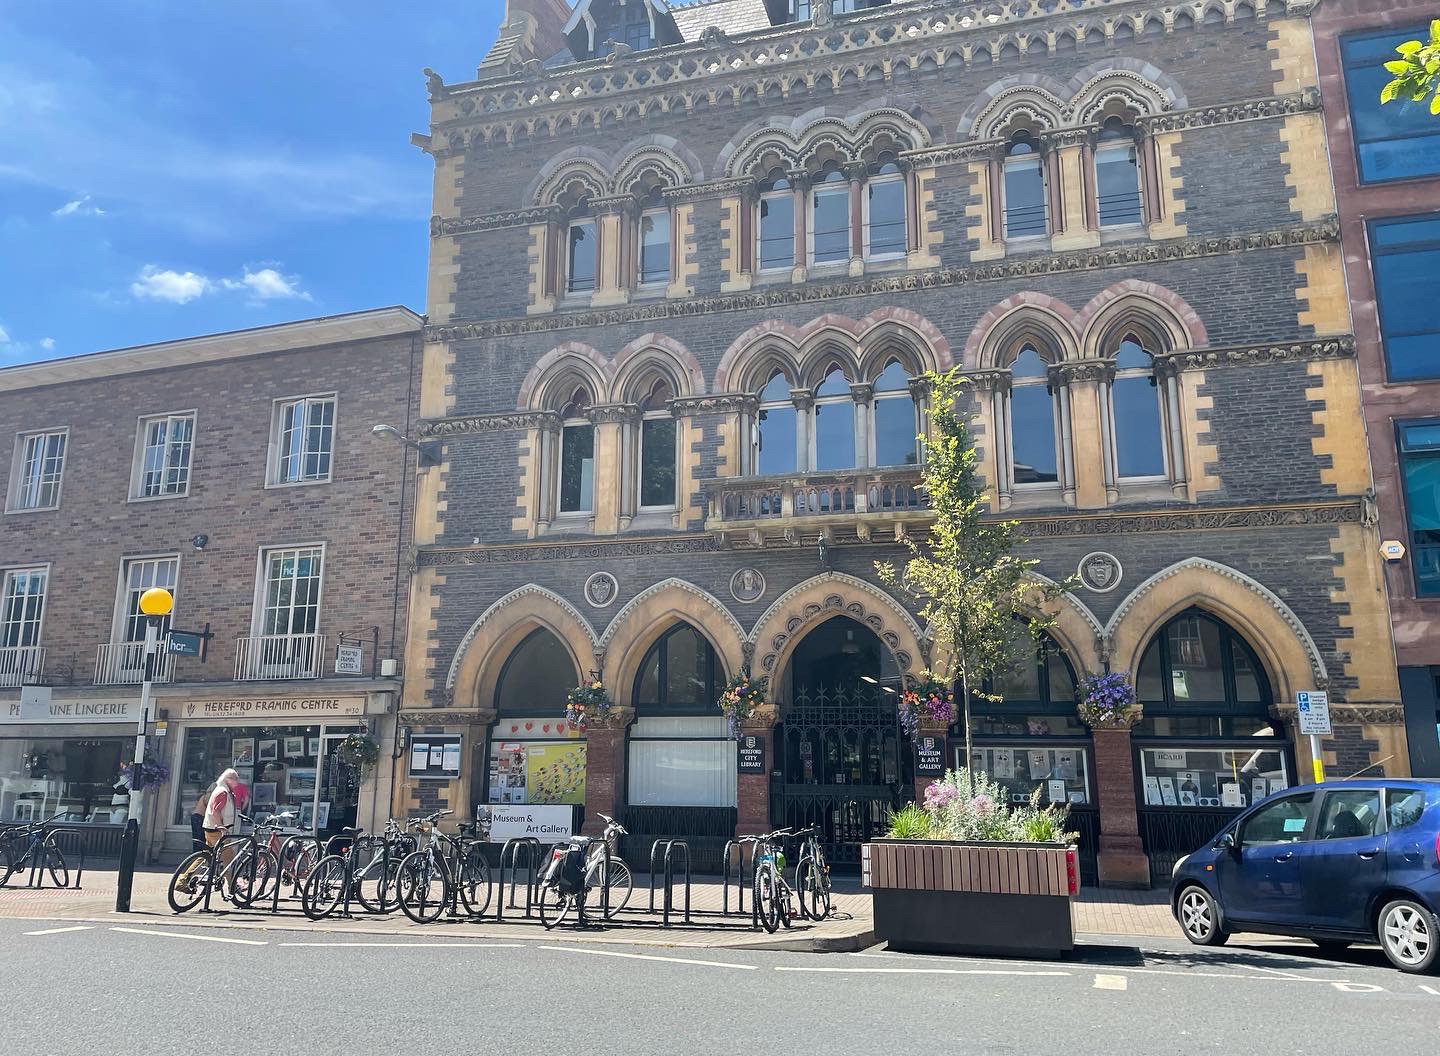 NEWS | Cllr Gemma Davies – “We expect the new museum in Hereford to attract around £2.5m to the local economy every year.”